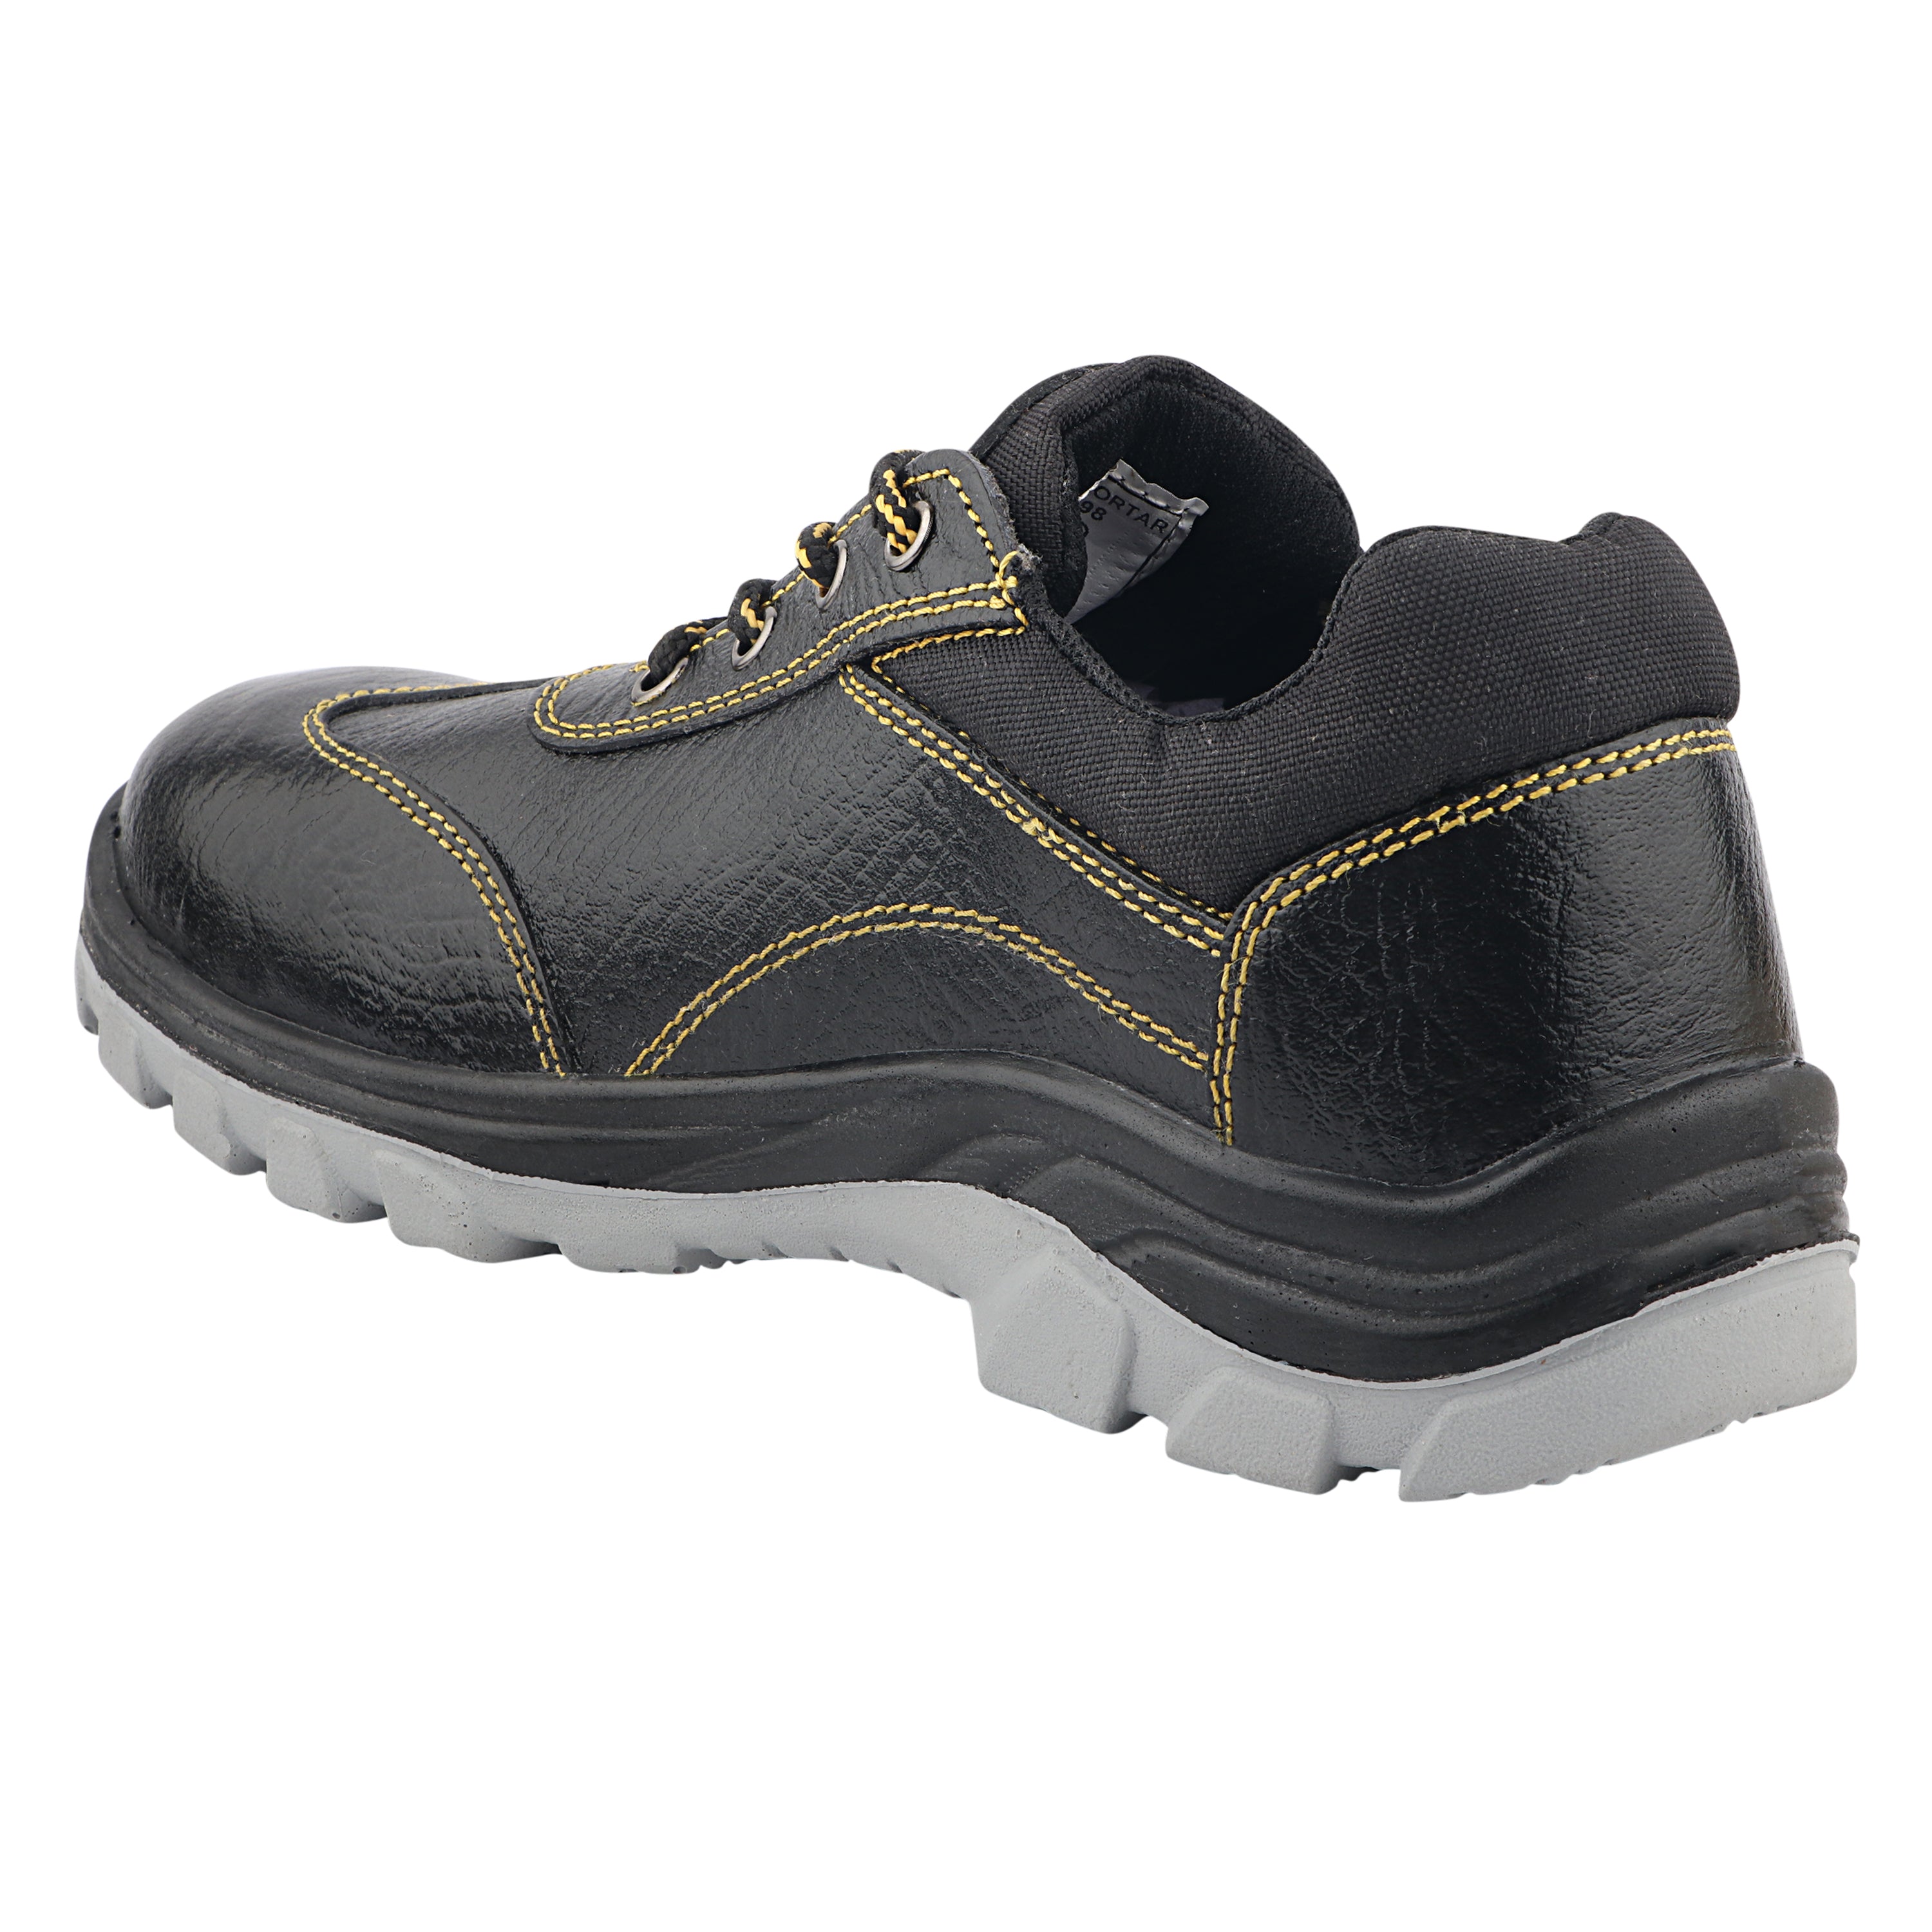 Fuel Mortar Genuine Leather Safety Shoes for Men's Steel Toe Cap With Double Density PU Sole (Black)